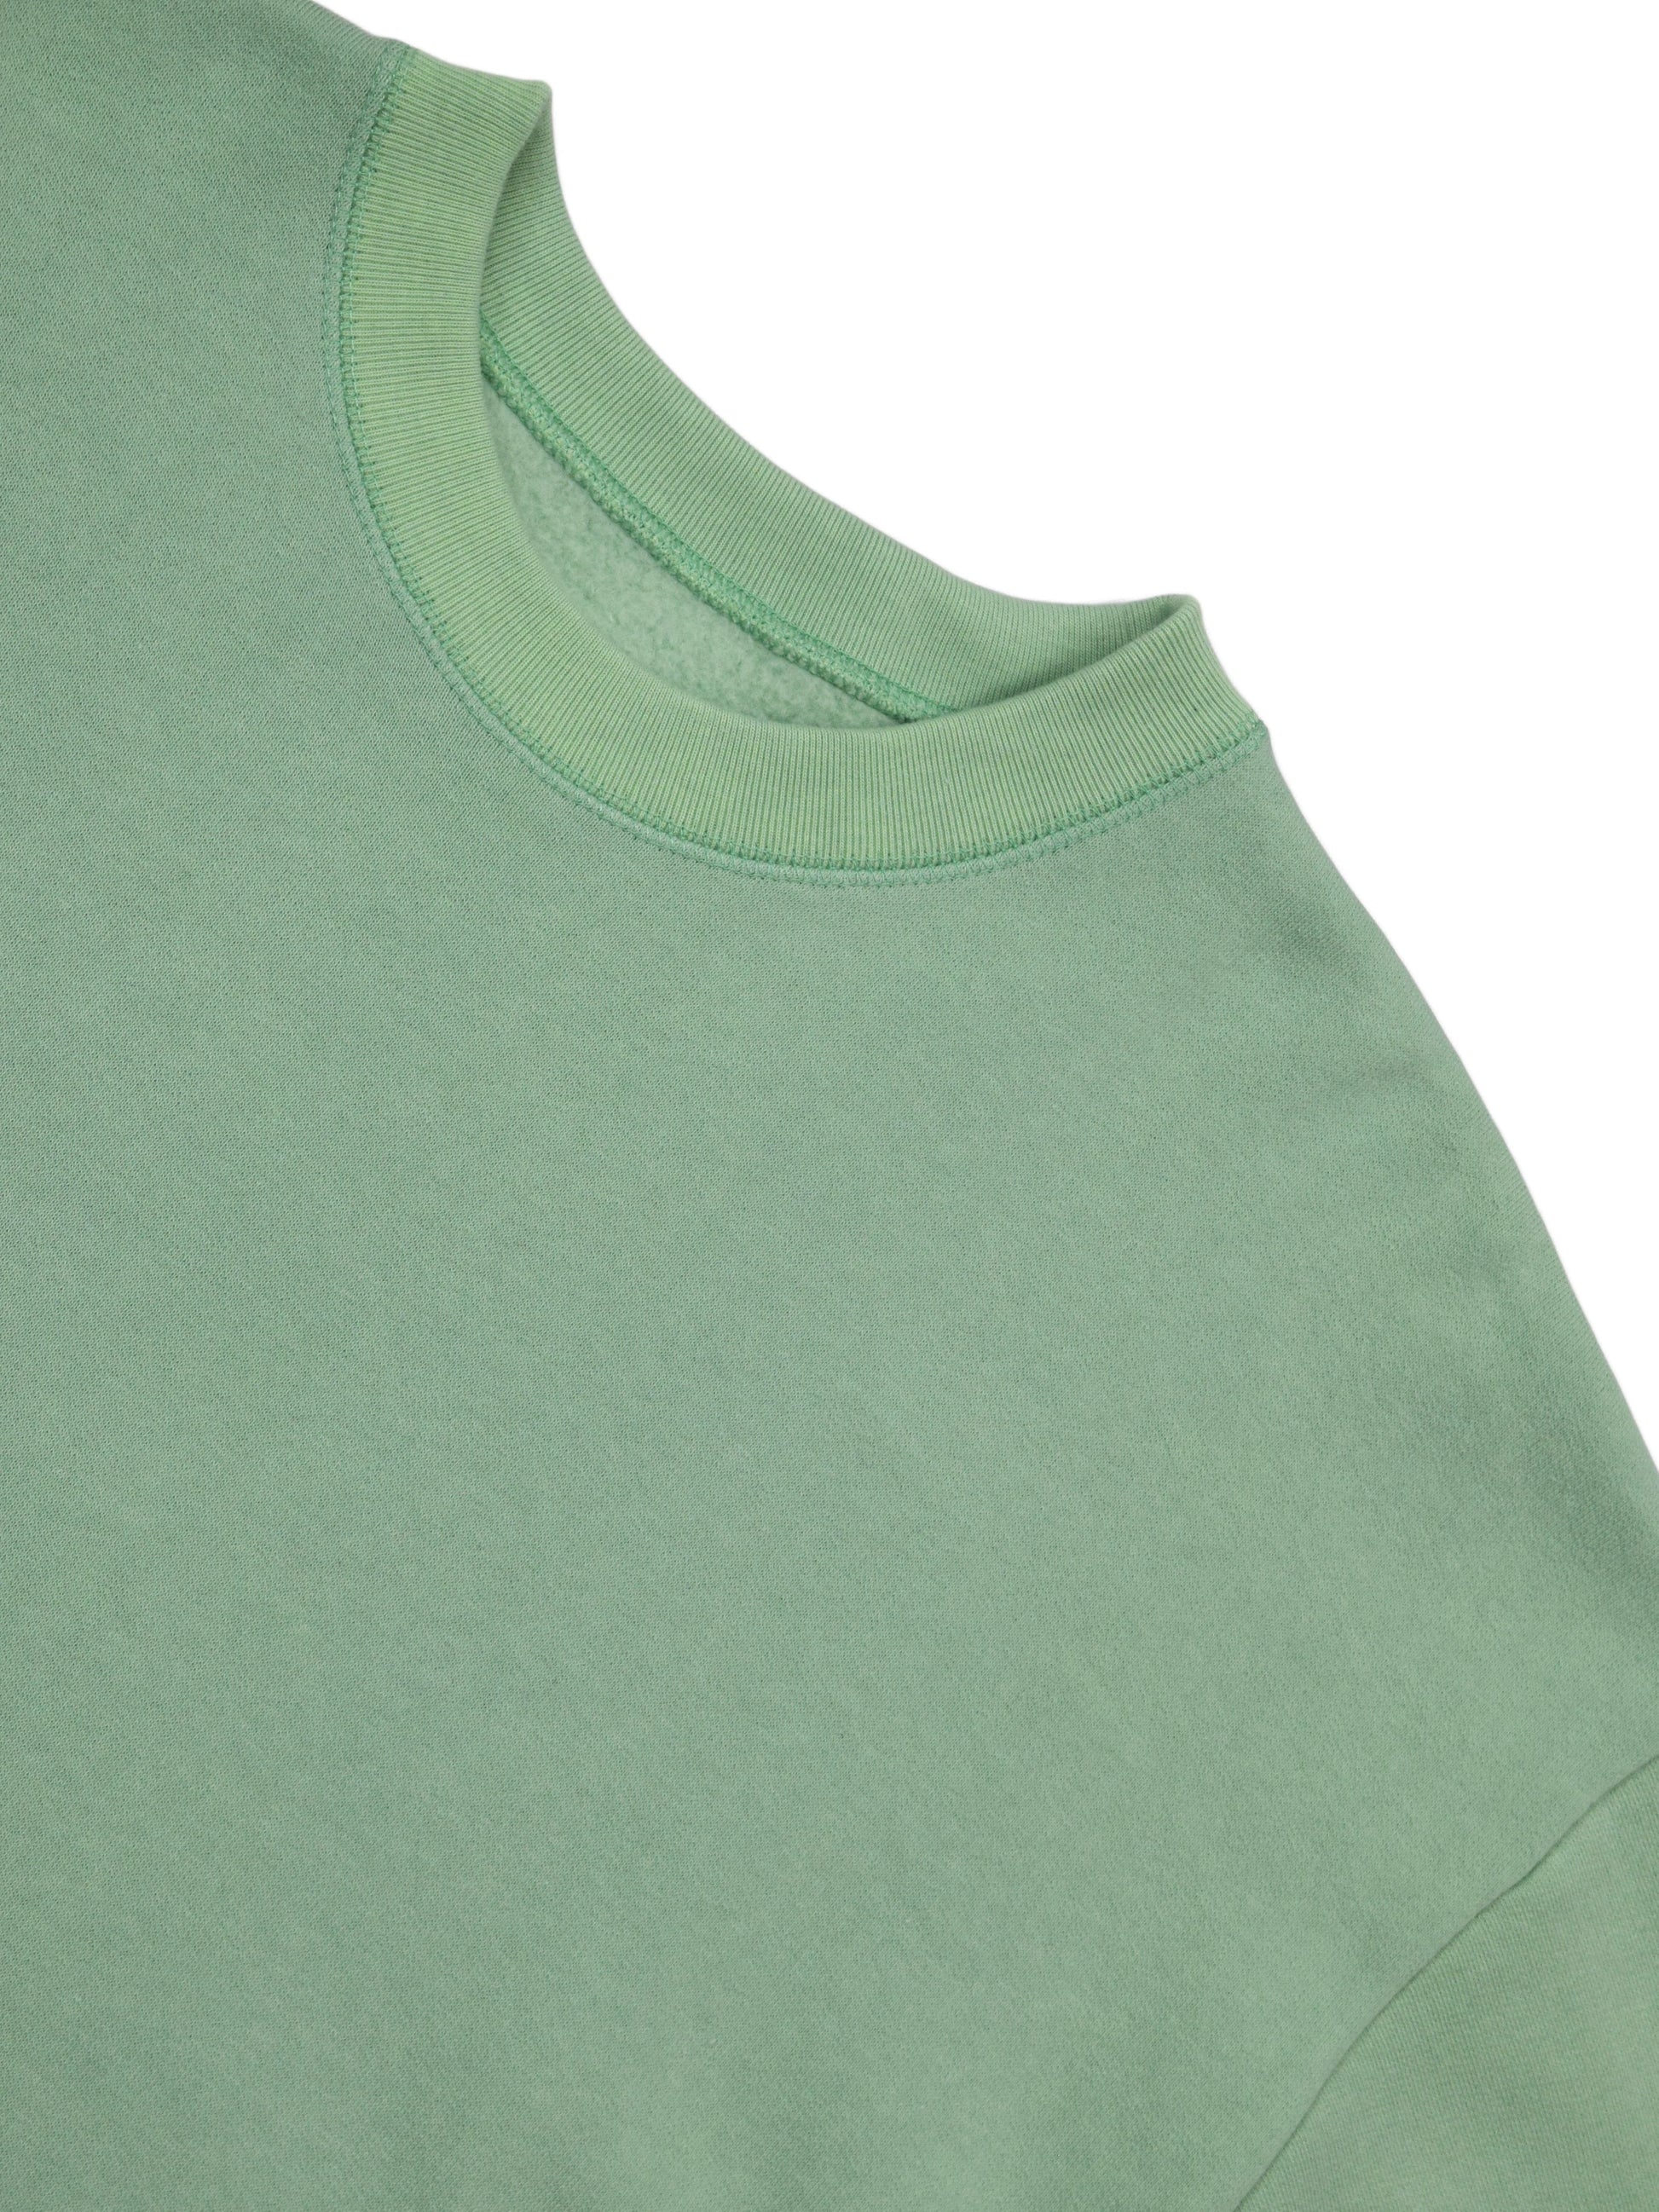 Close up of the crewneck and soft mint green cotton material